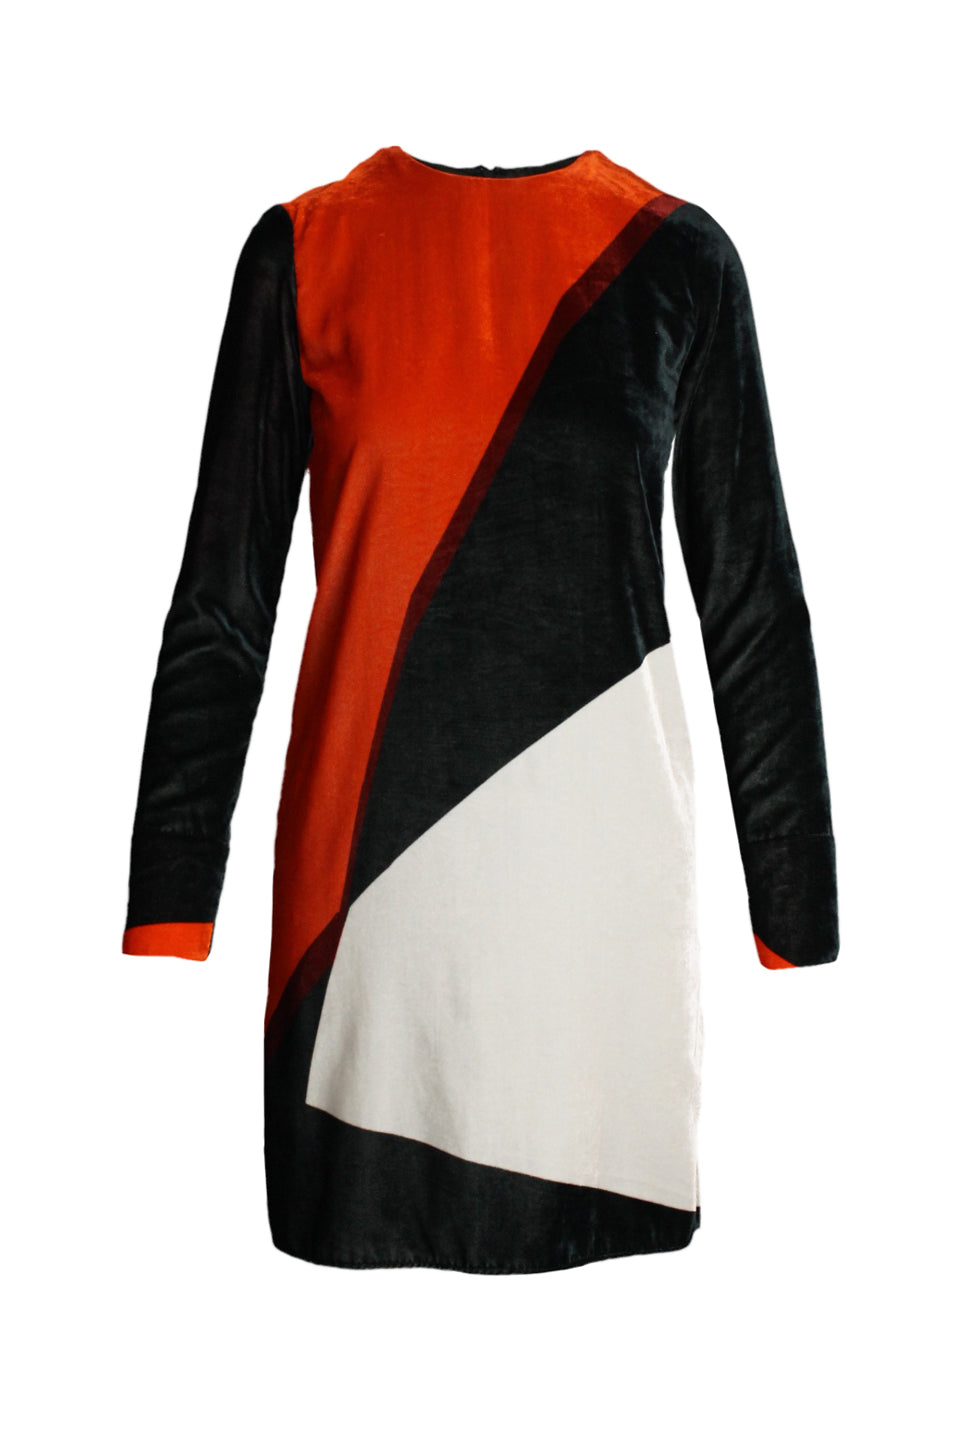 front of cedric charlier multicolor long sleeve velvet mini dress. features crew neckline, geometrical design, slit at sides, and zip closure at back; slim fit. 